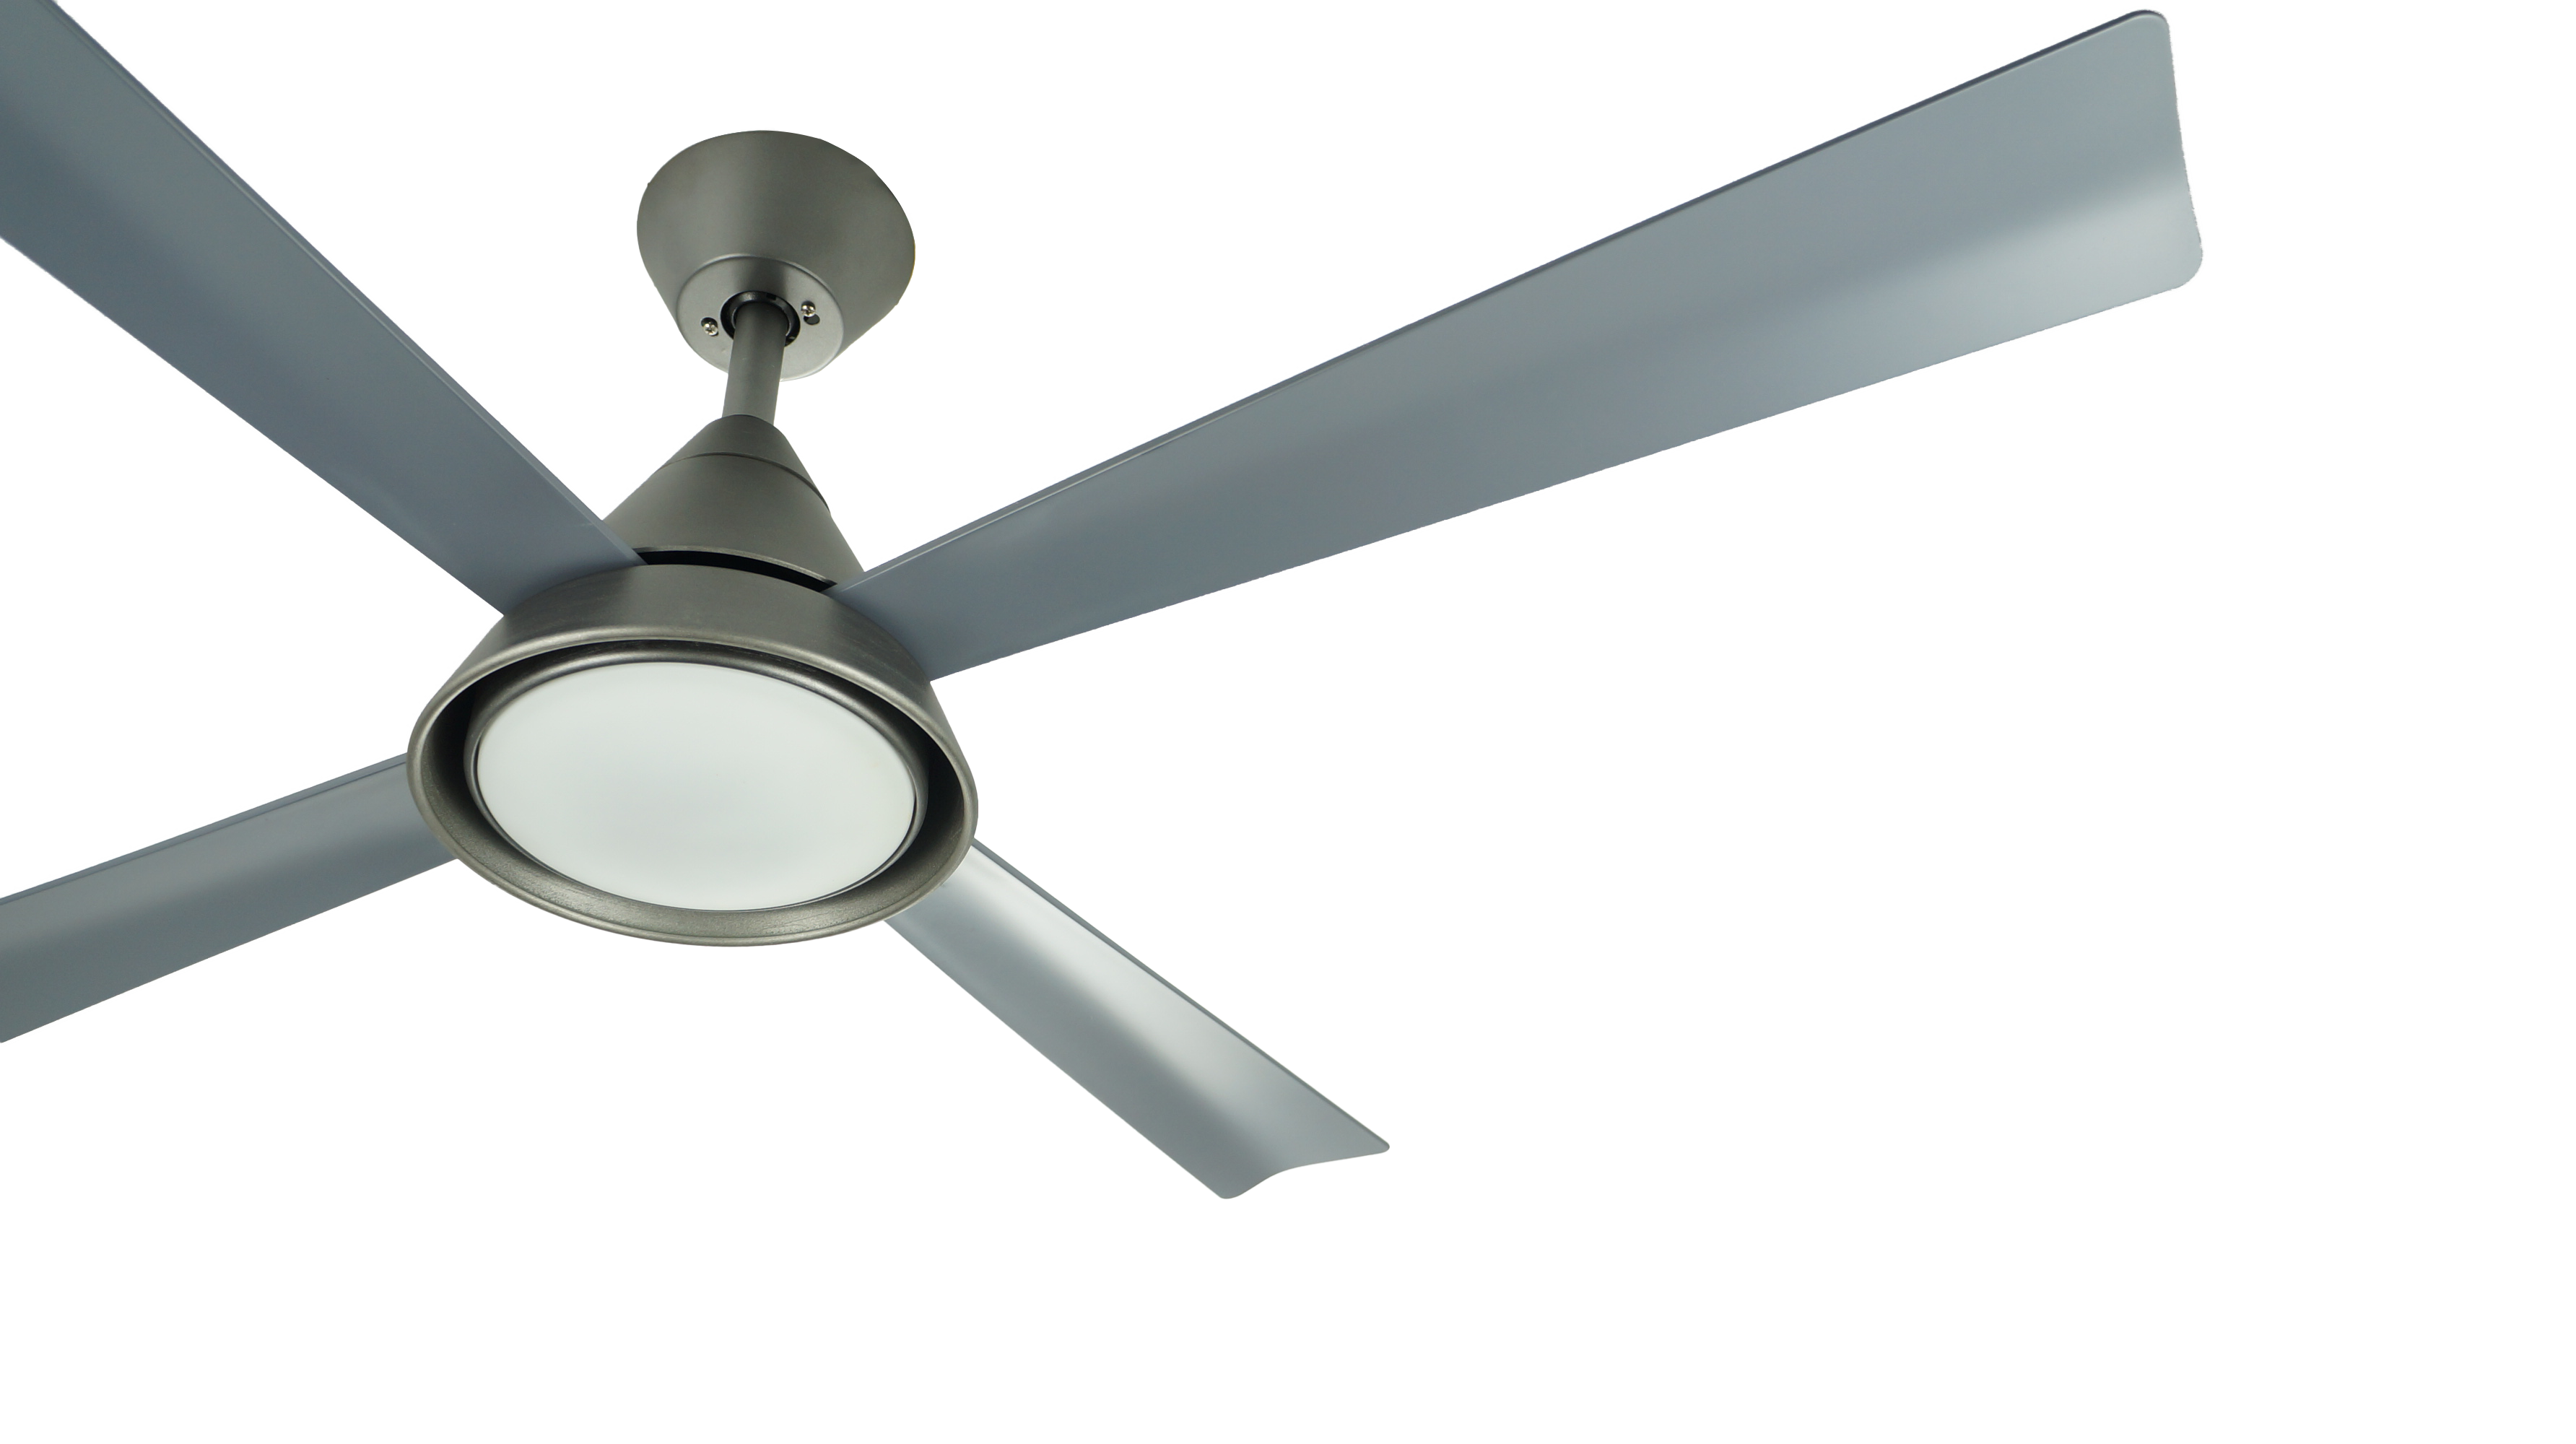 Stainless Steel Blade Electric BLDC Modern Remote Control Ceiling Fan